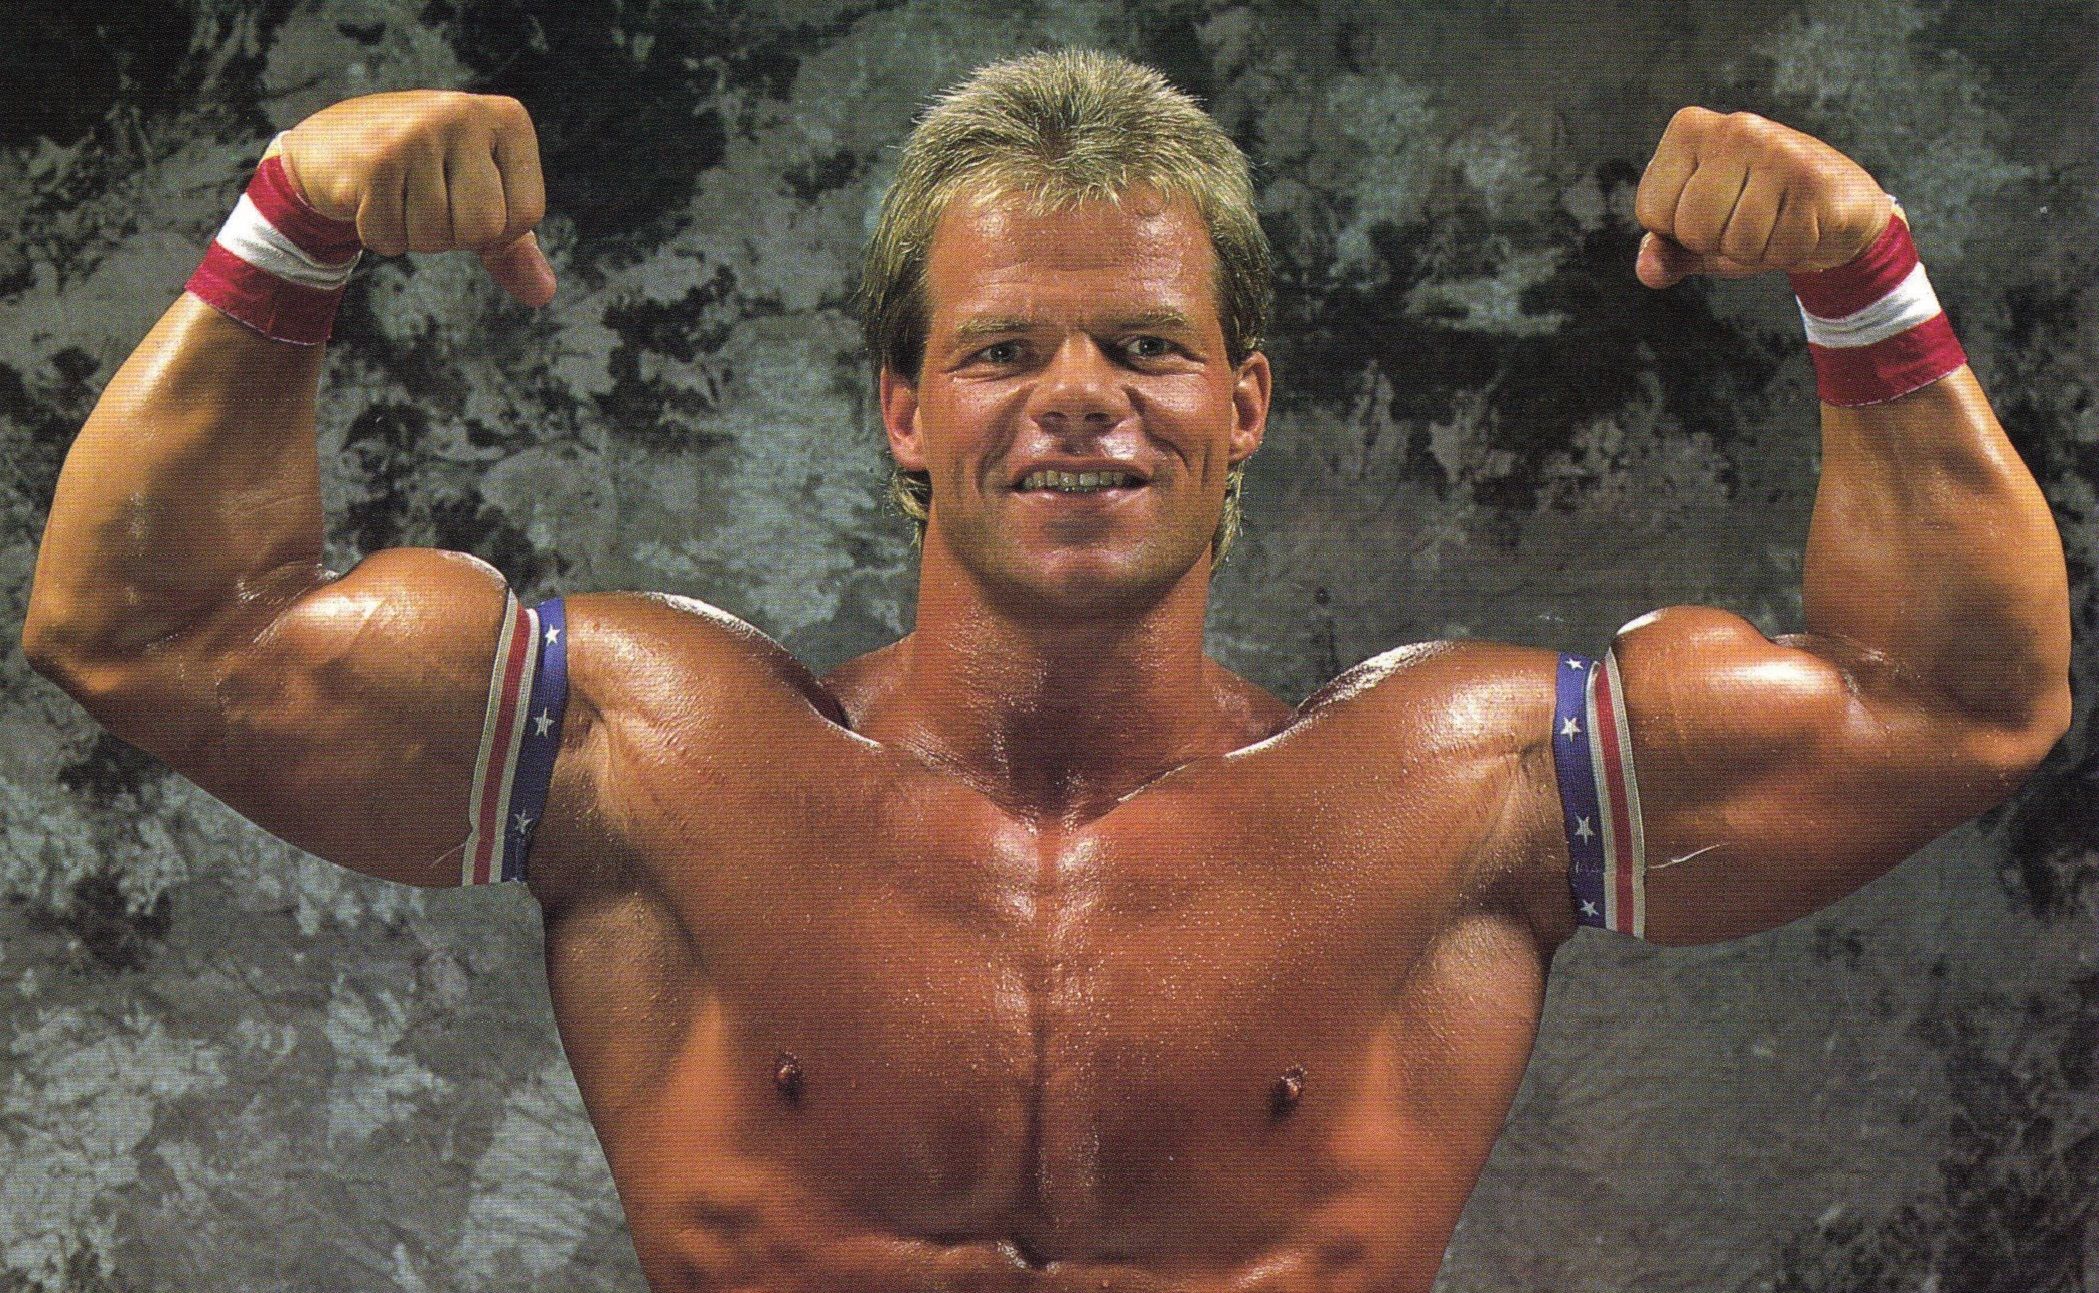 The 12 Best Bodies in WWE History - Muscle & Fitness